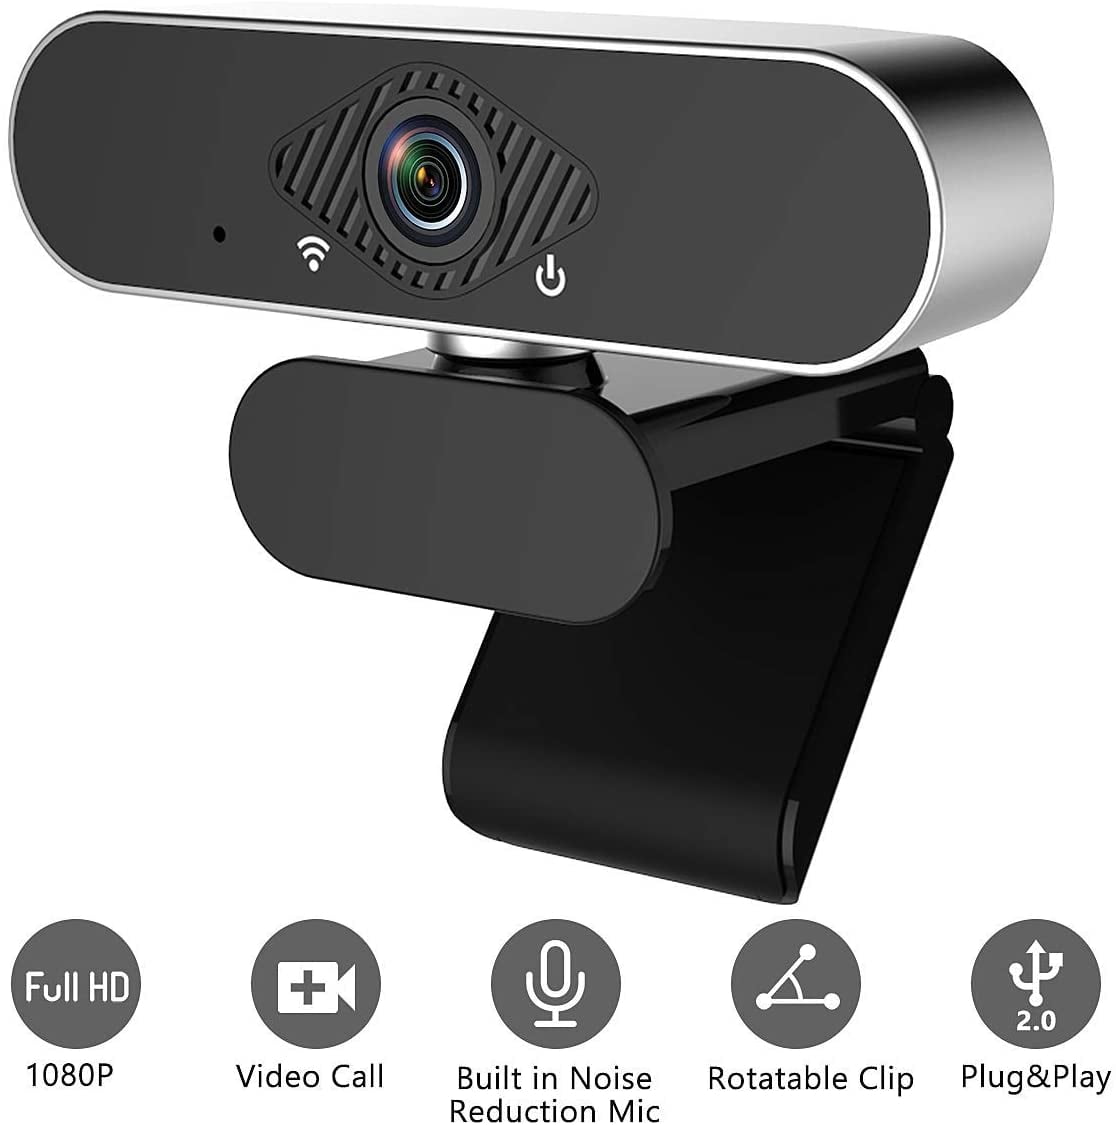 Pc USB Camera Streaming 110-Degree Wide Angle with Privacy Cover Tripod Mic for Study,Conference,Video Calling Burxoe Webcam,1080P Hd Web Camera with Microphone for Desktop Computer Laptop 